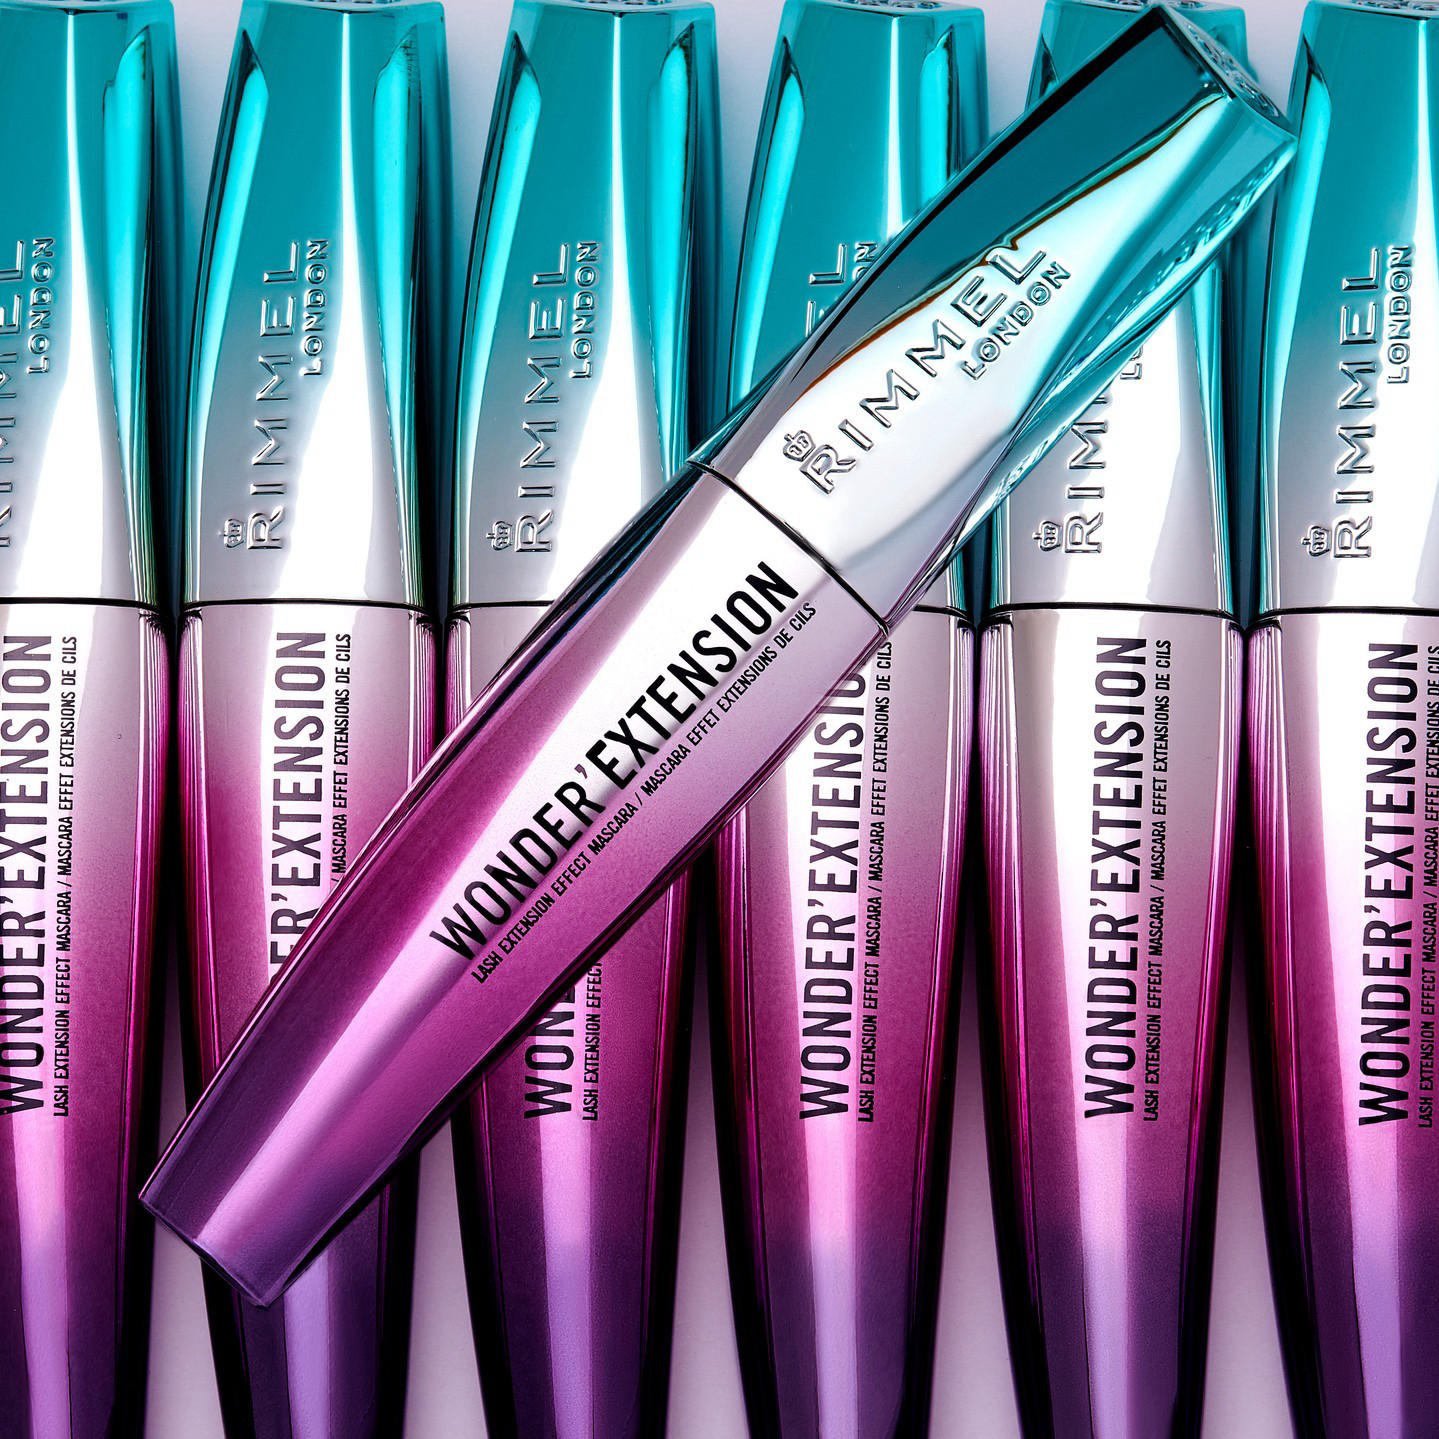 Rimmel London US - Get the look of lash extensions in seconds with Wonder’Extension Mascara